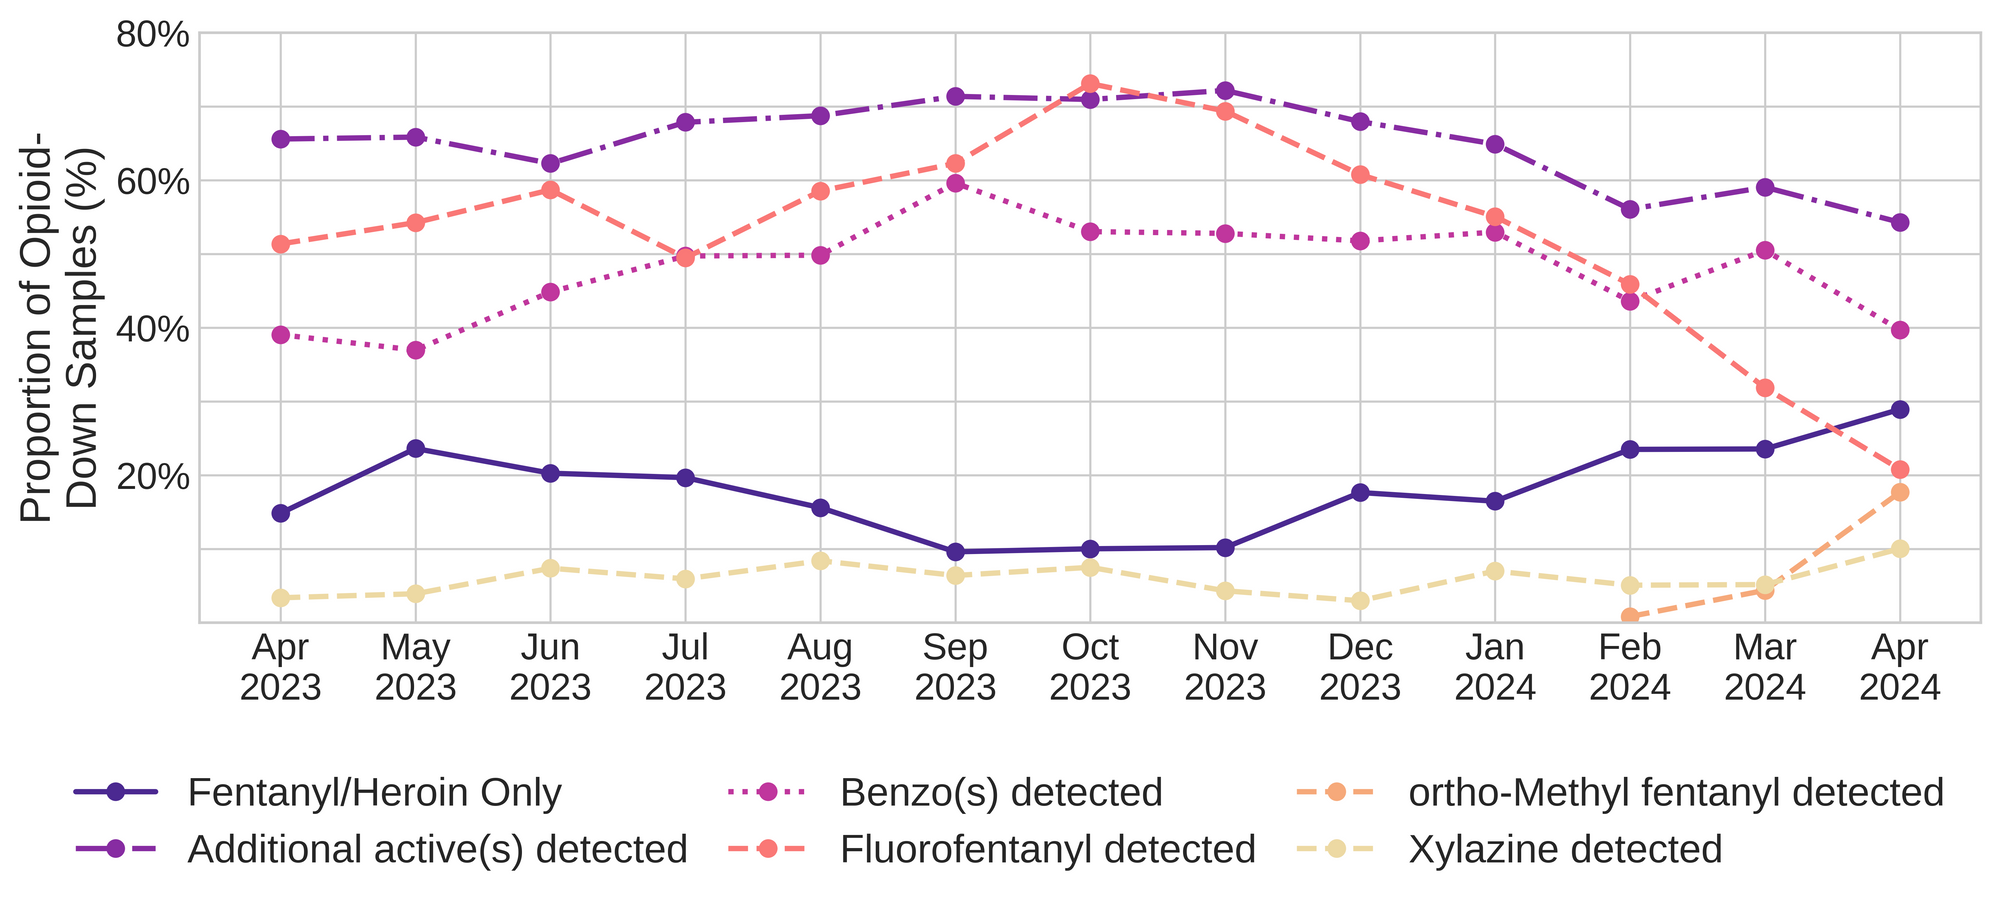 Figure 3. The percentage of expected opioid-down samples checked between April 2023 and April 2024 that only contained fentanyl/heroin actives (solid dark purple), opioid-down samples with an additional active detected (dot-dashed light purple), opioid-down samples that contained a benzodiazepine-related drug (dotted magenta), opioid-down samples that contained fluorofentanyl (dashed salmon), opioid-down samples that contained ortho-methyl fentanyl (dashed orange), and opioid-down samples that contained xylazine (dashed yellow).